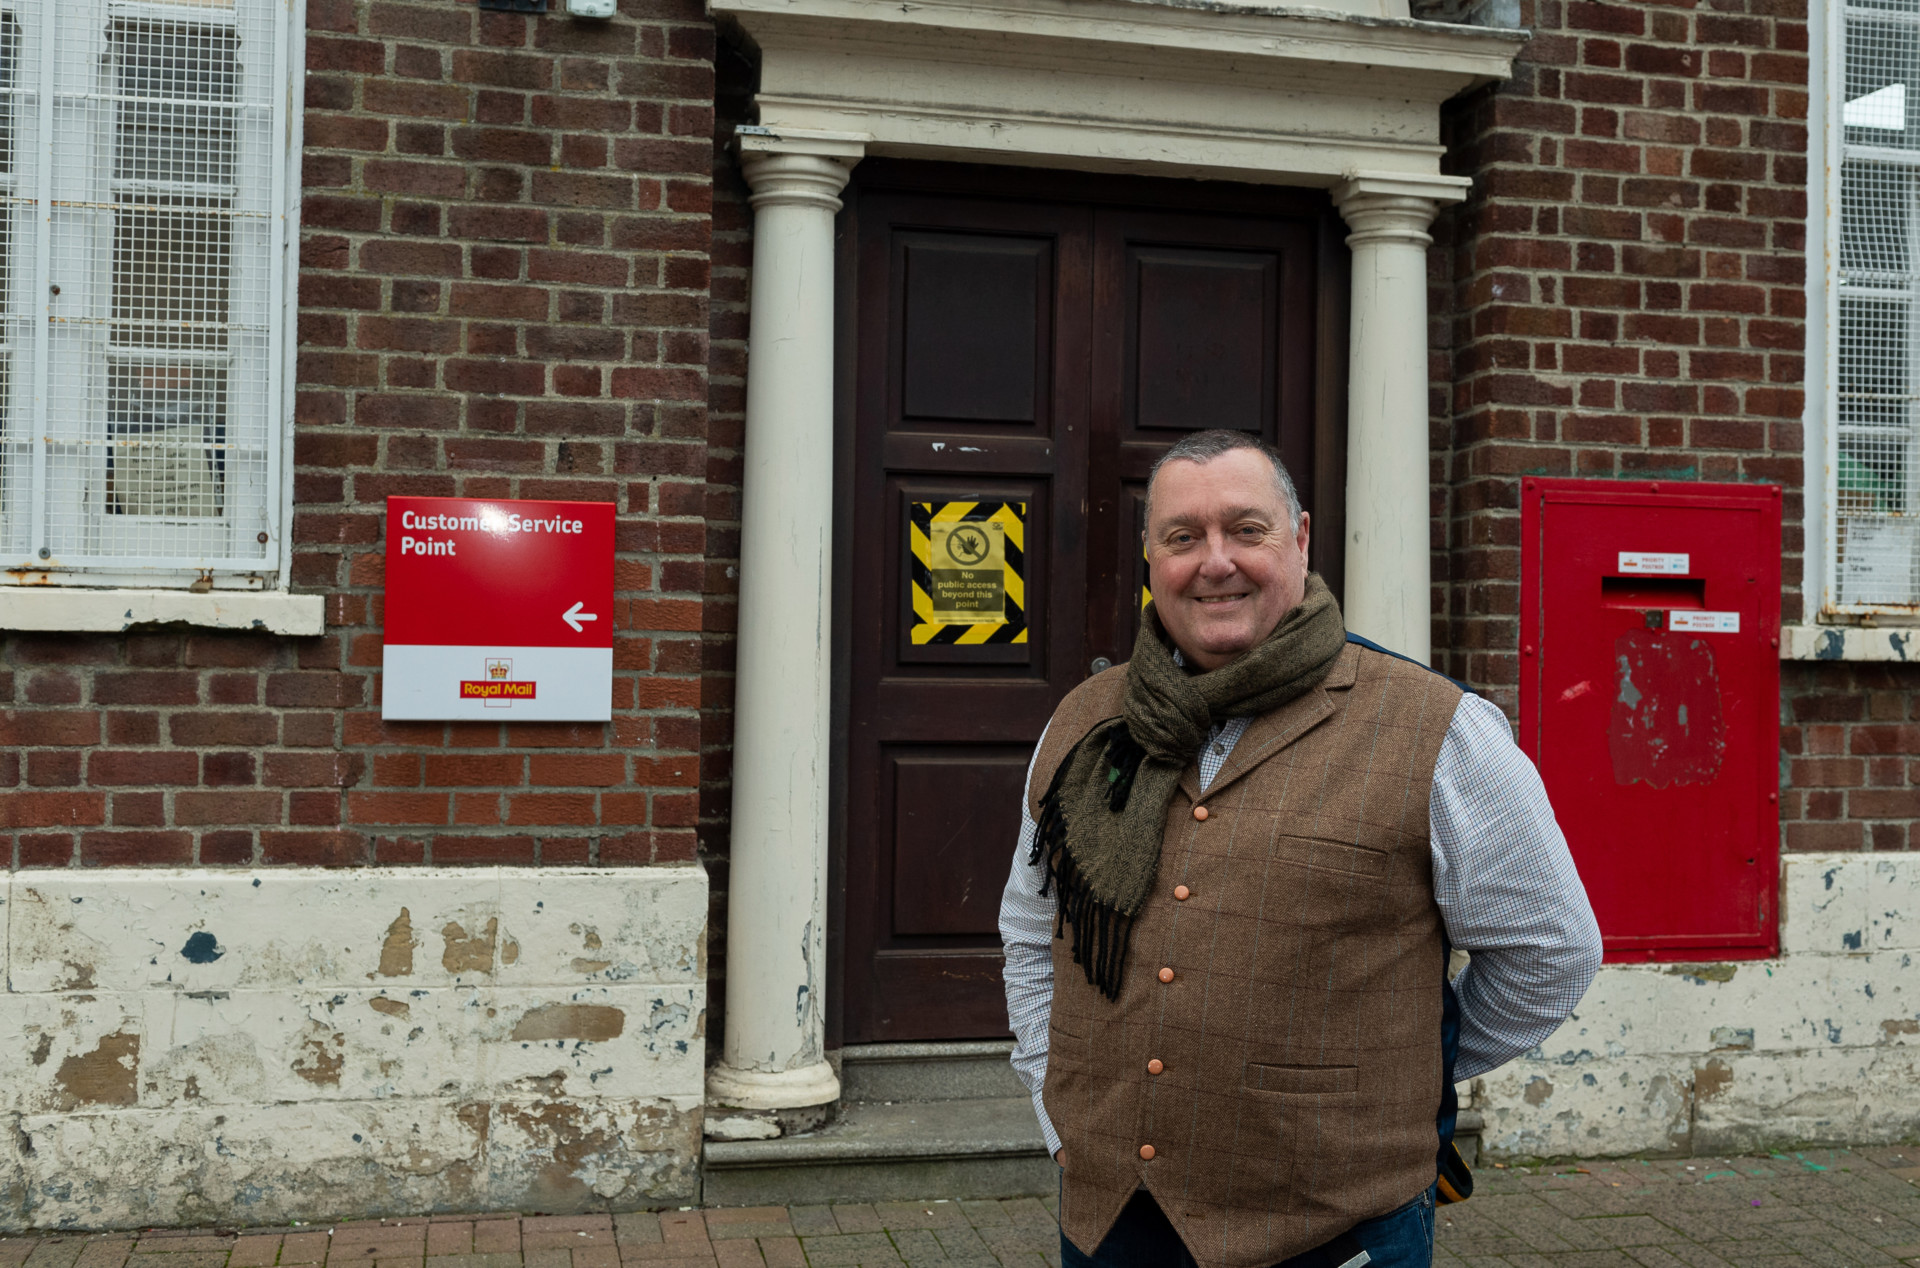 Final delivery for Postie Paul after three decades in Strabane